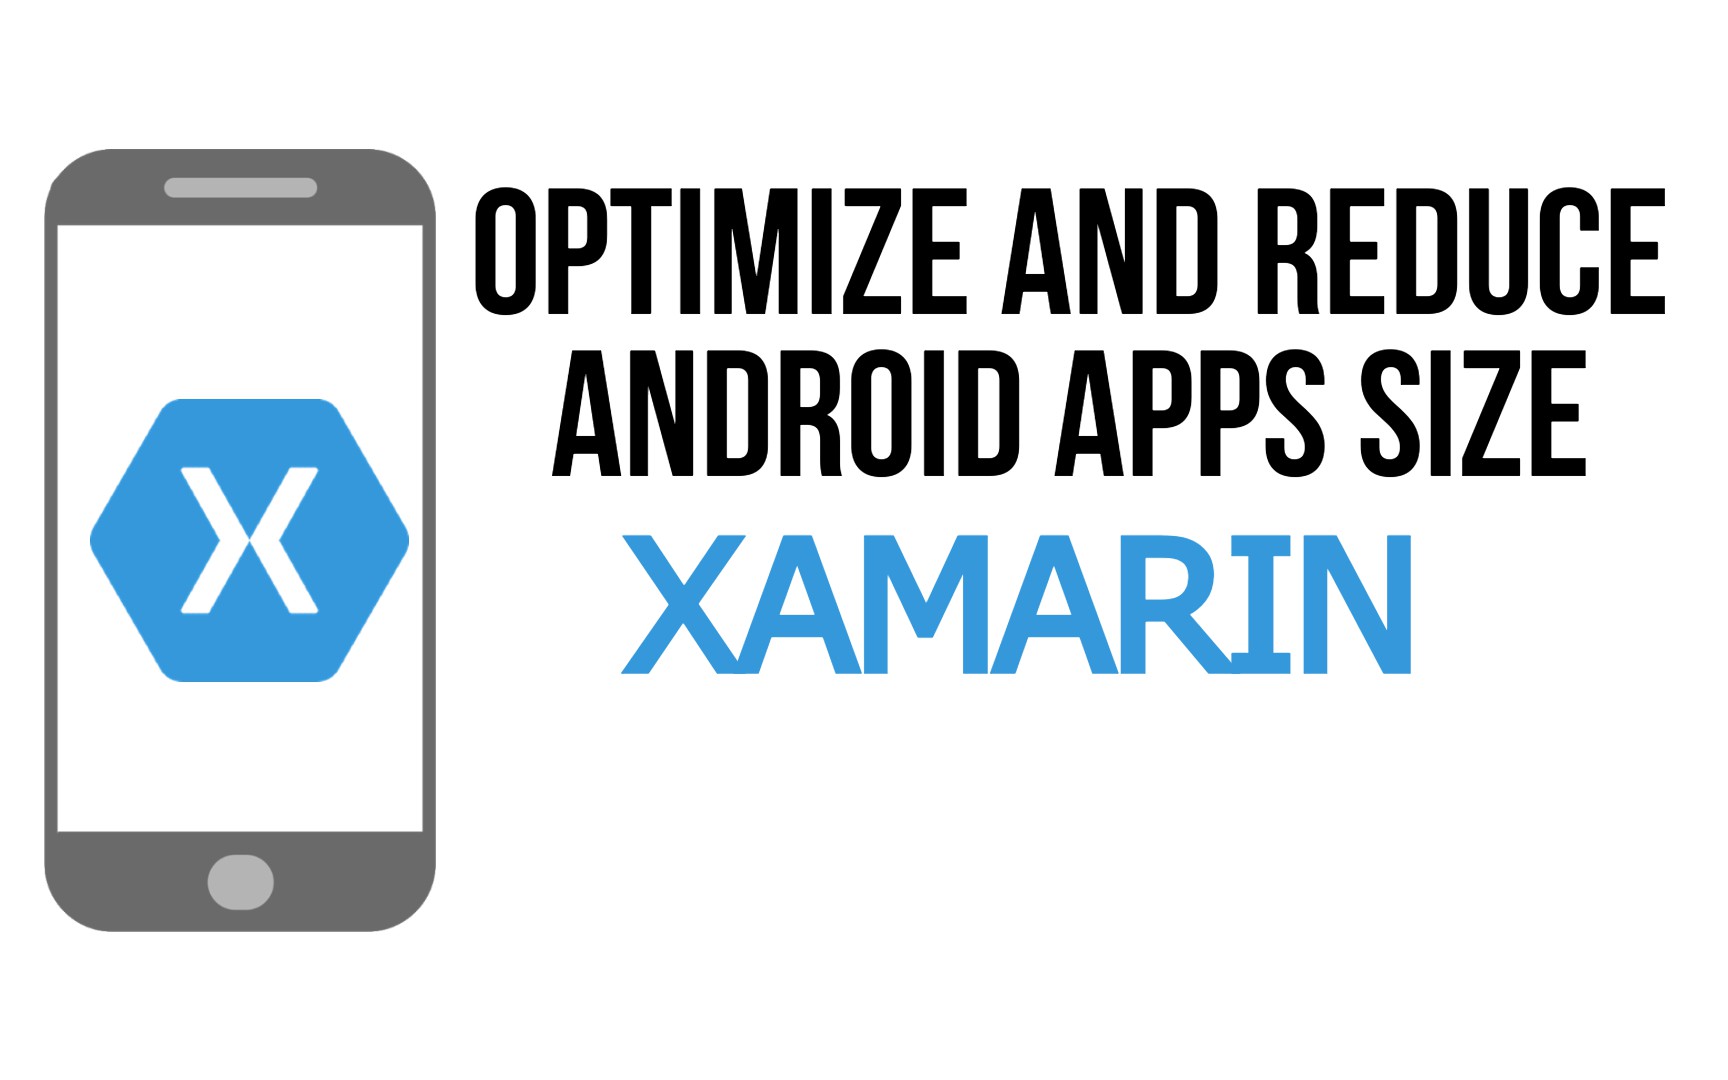 How To Optimize and Reduce Android Apps Size in Xamarin